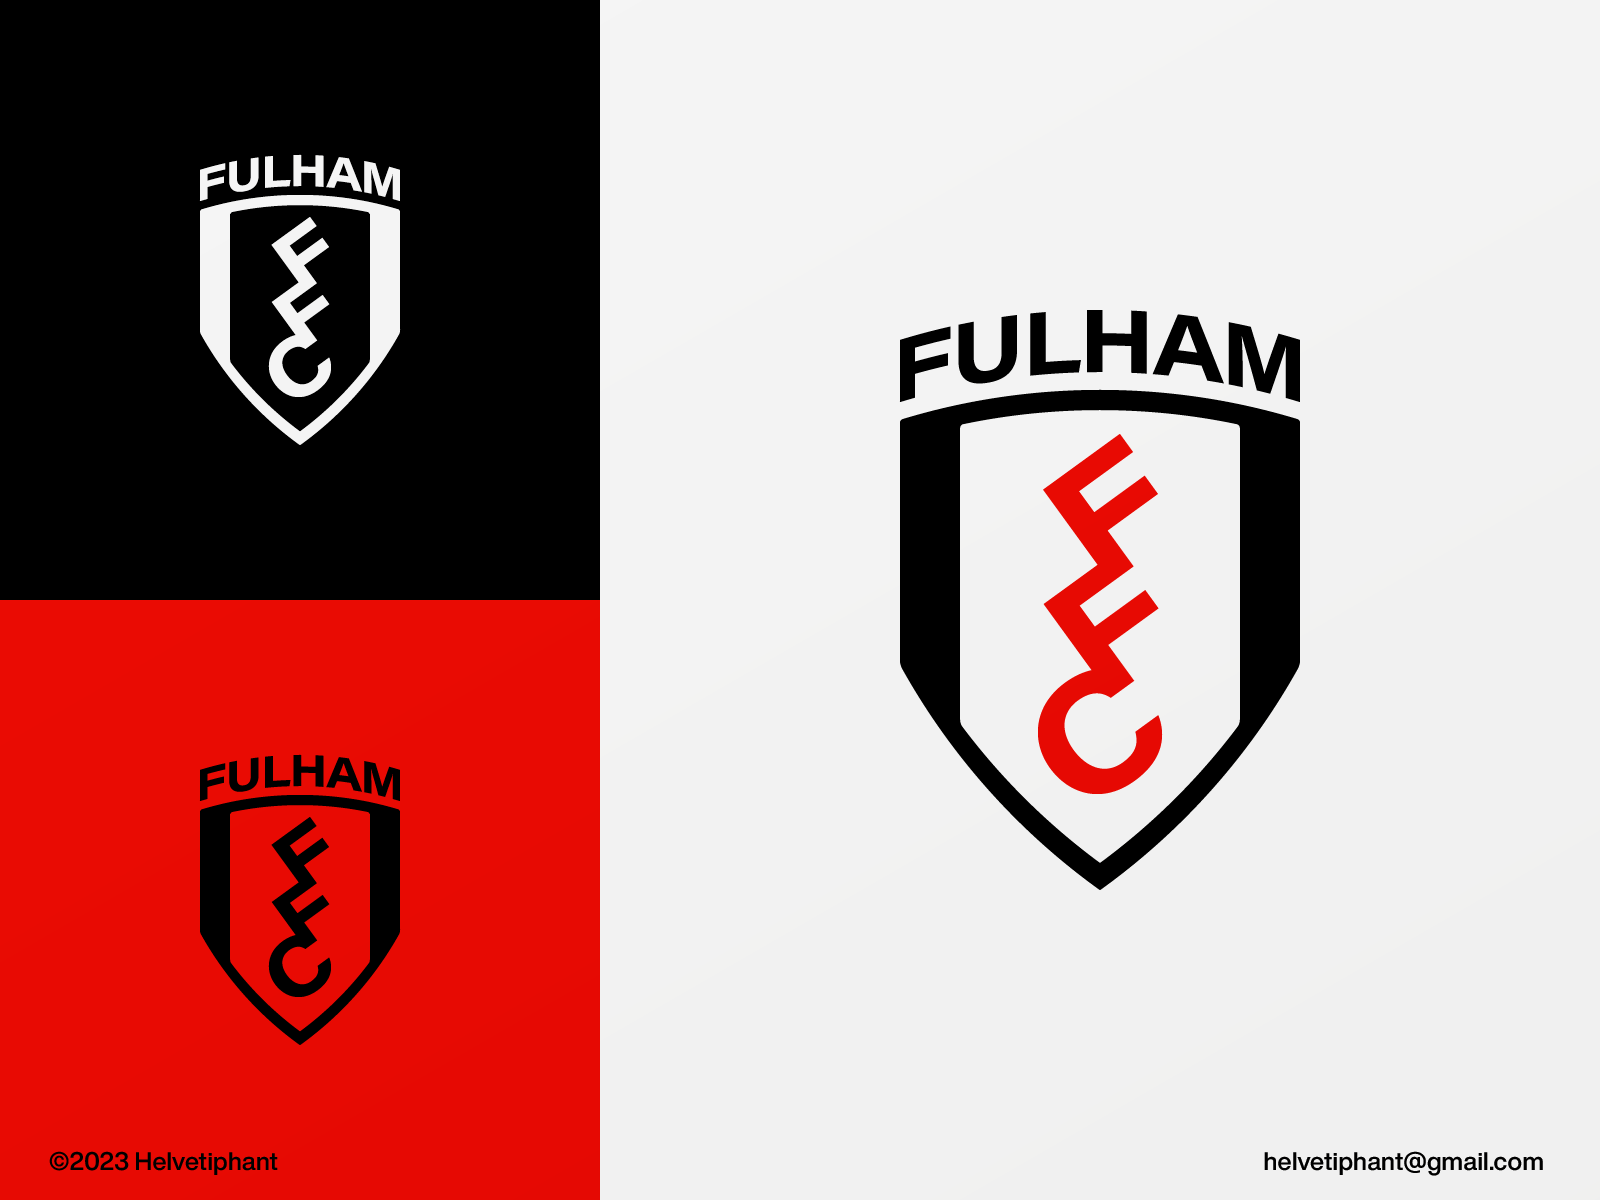 Fulham Fc   Logo Concept By Helvetiphant 4x 